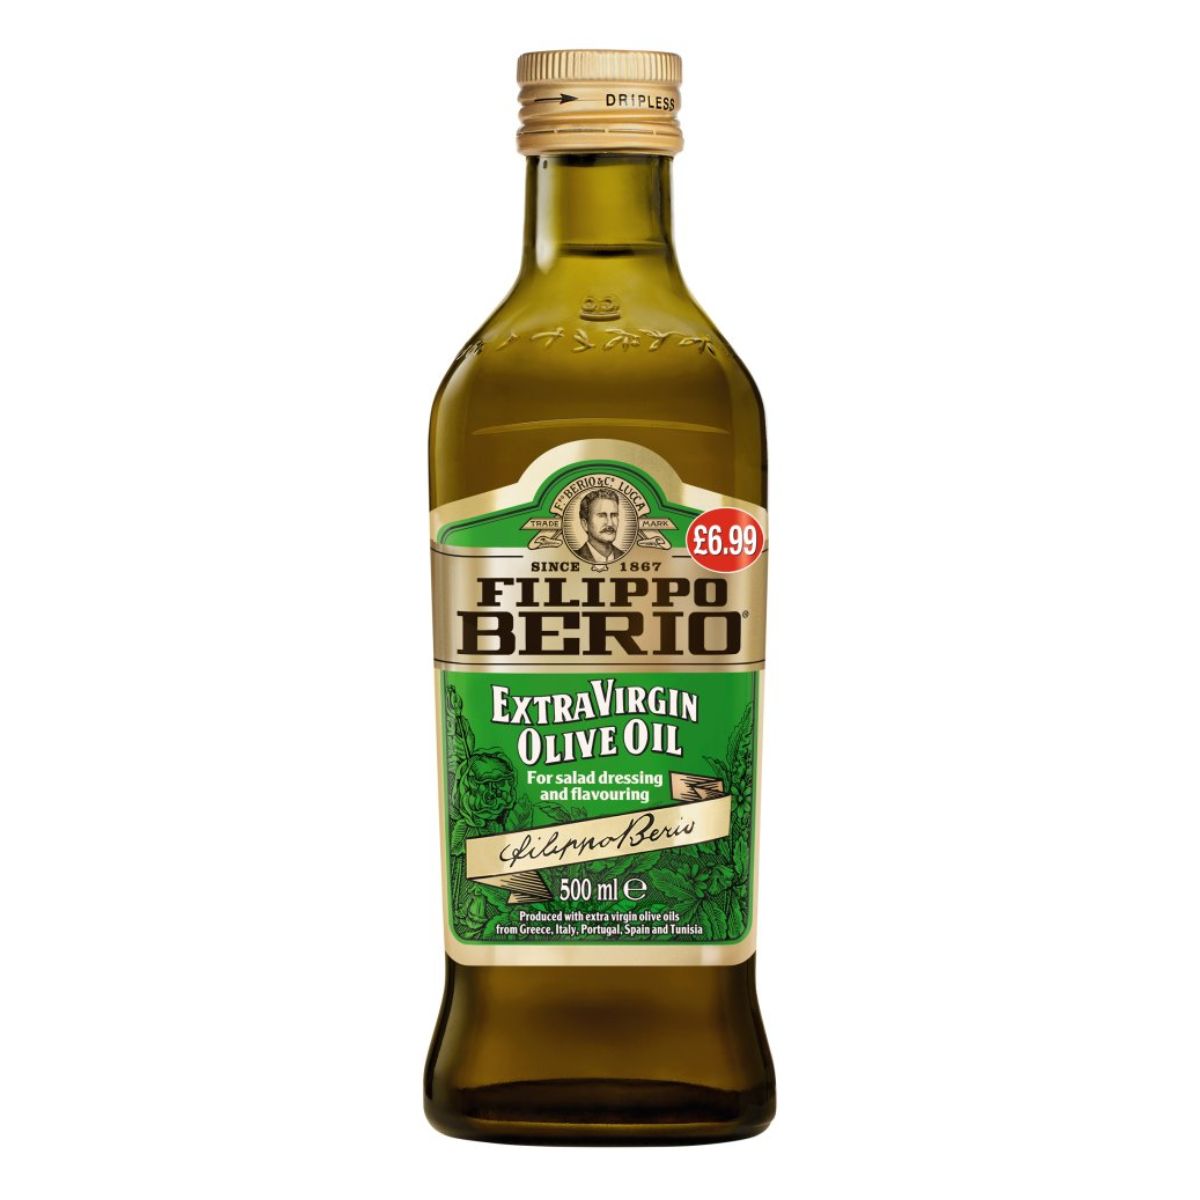 A bottle of Filippo Berio - Extra Virgin Olive Oil - 500ml on a white background.